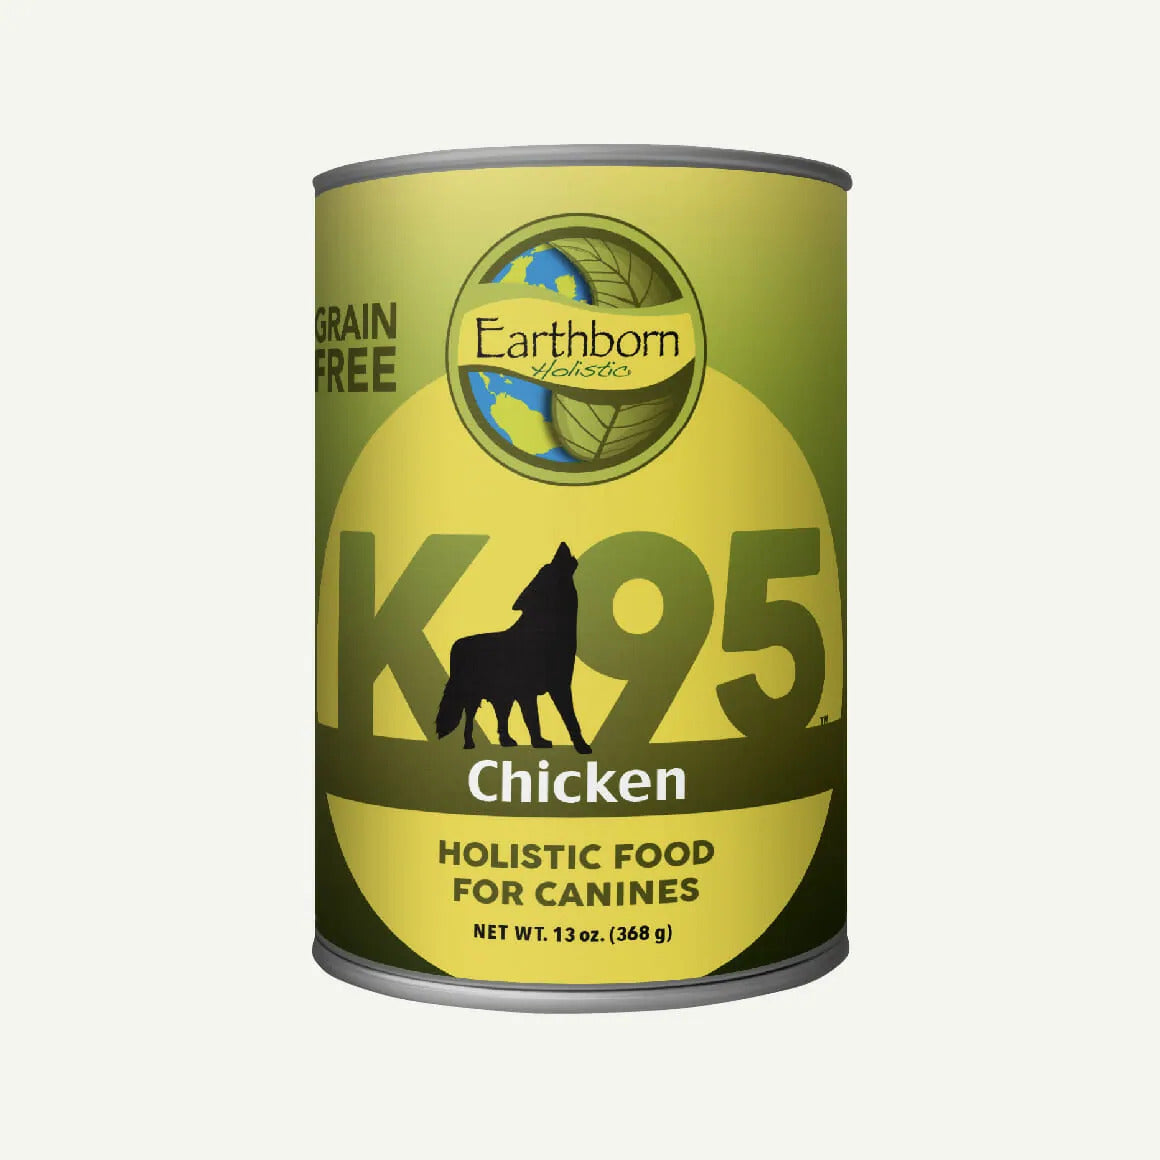 Earthborn Canned Dog Food K95 Chicken 13oz